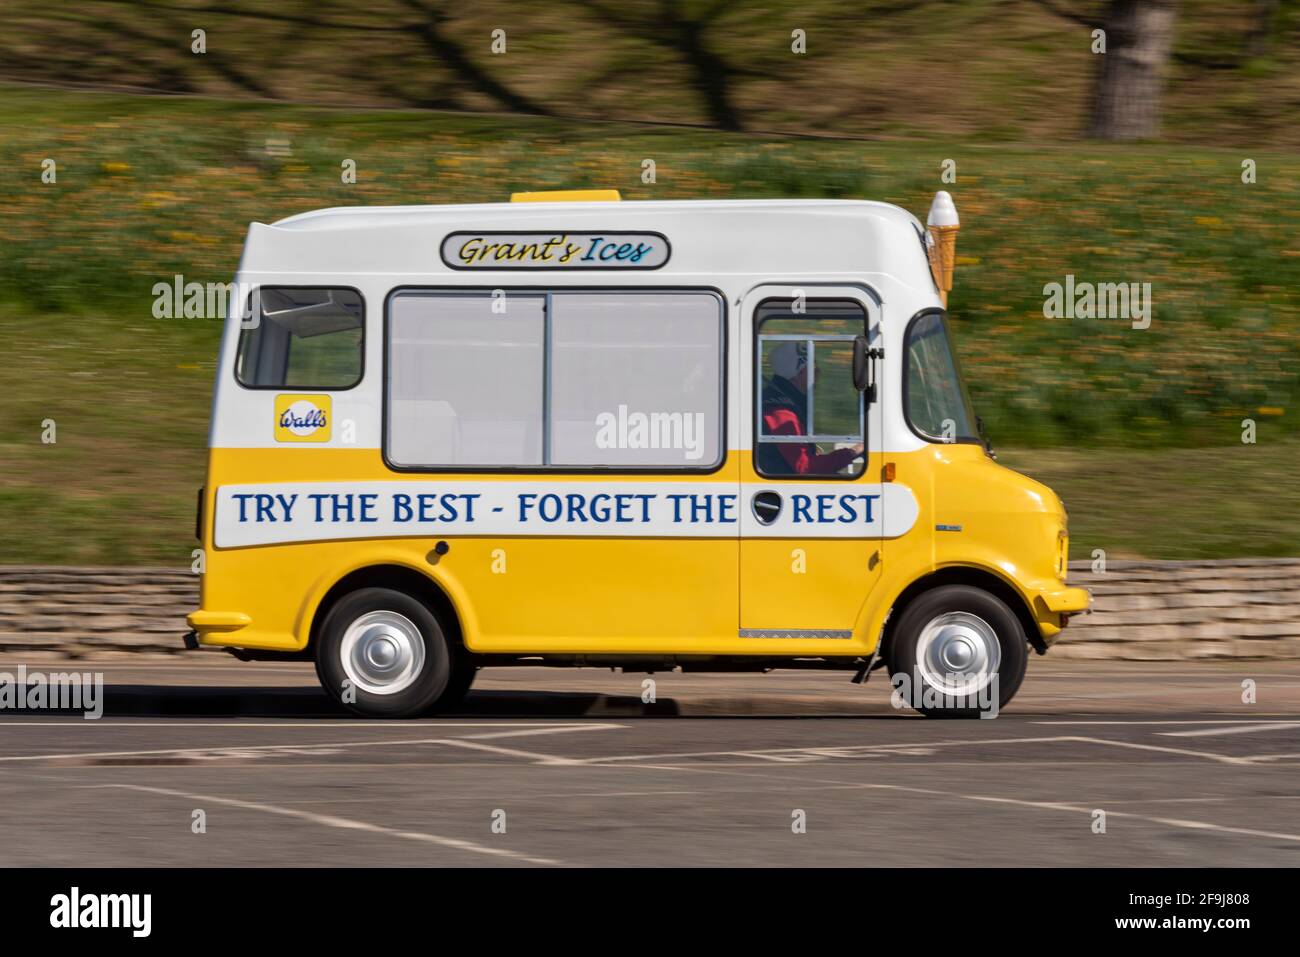 Ice Cream van driving in Southend on Sea, Essex, UK, on a sunny, bright Spring day. Grant's Ices. Try the best, forget the rest, slogan. 1980 Bedford Stock Photo